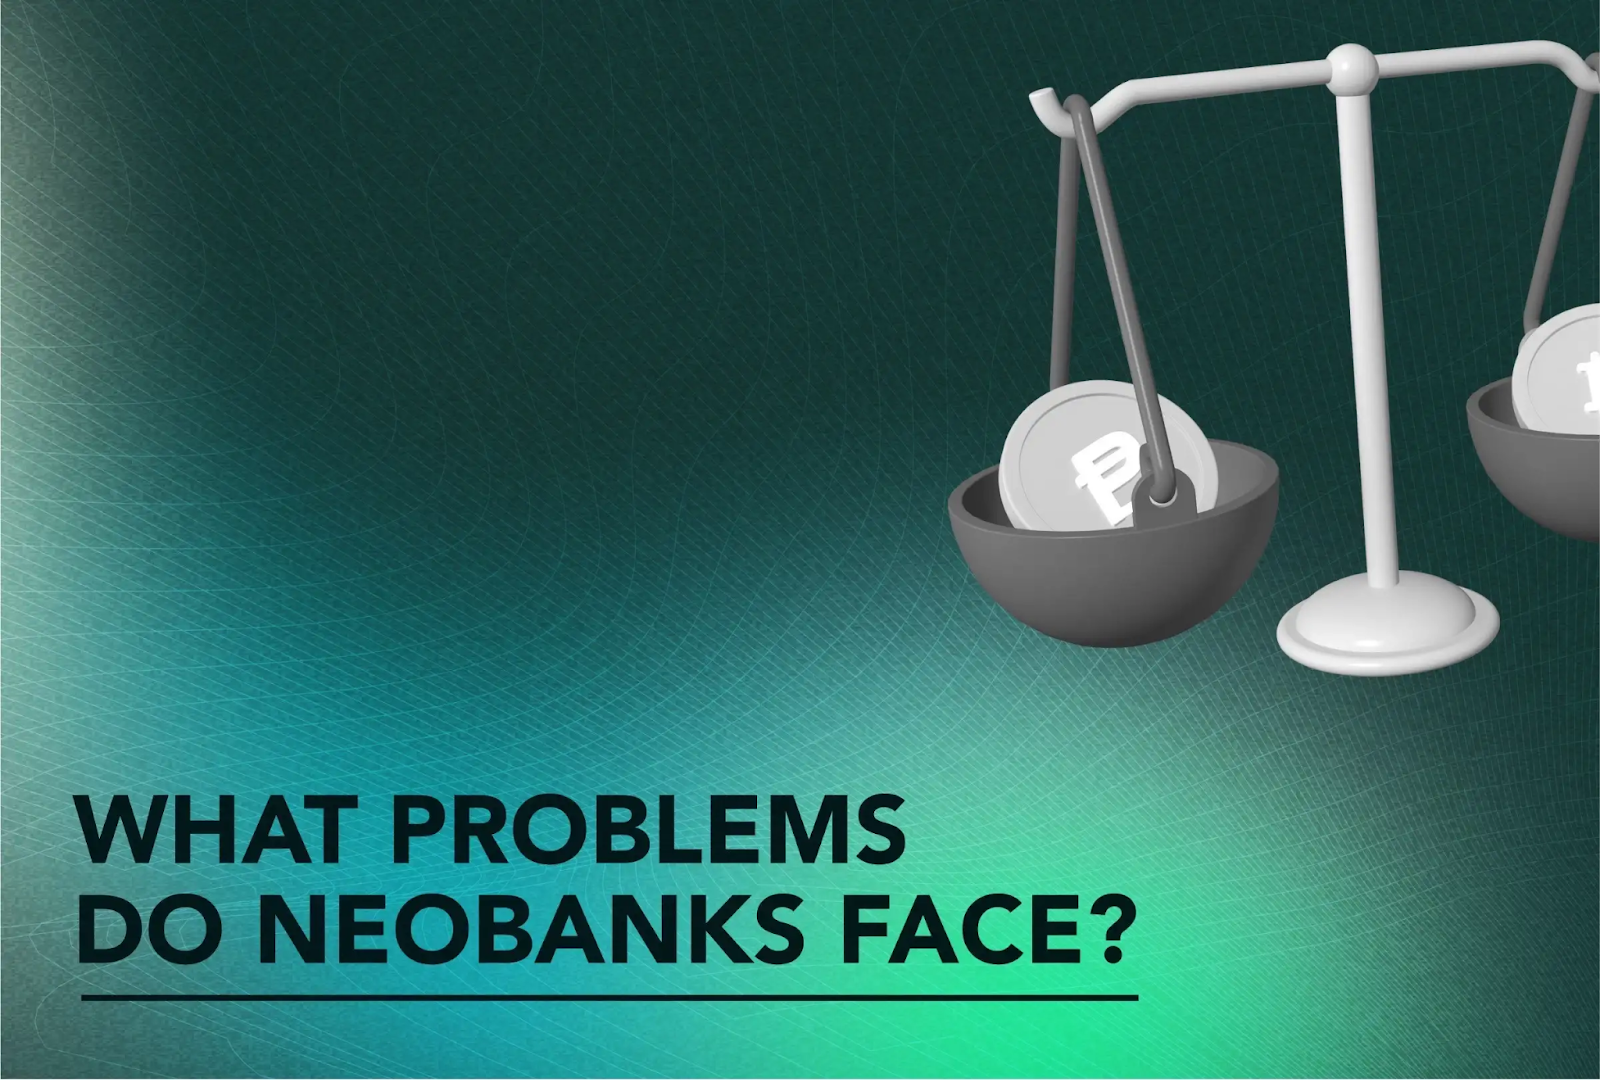 What Problems Do Neobanks Face?